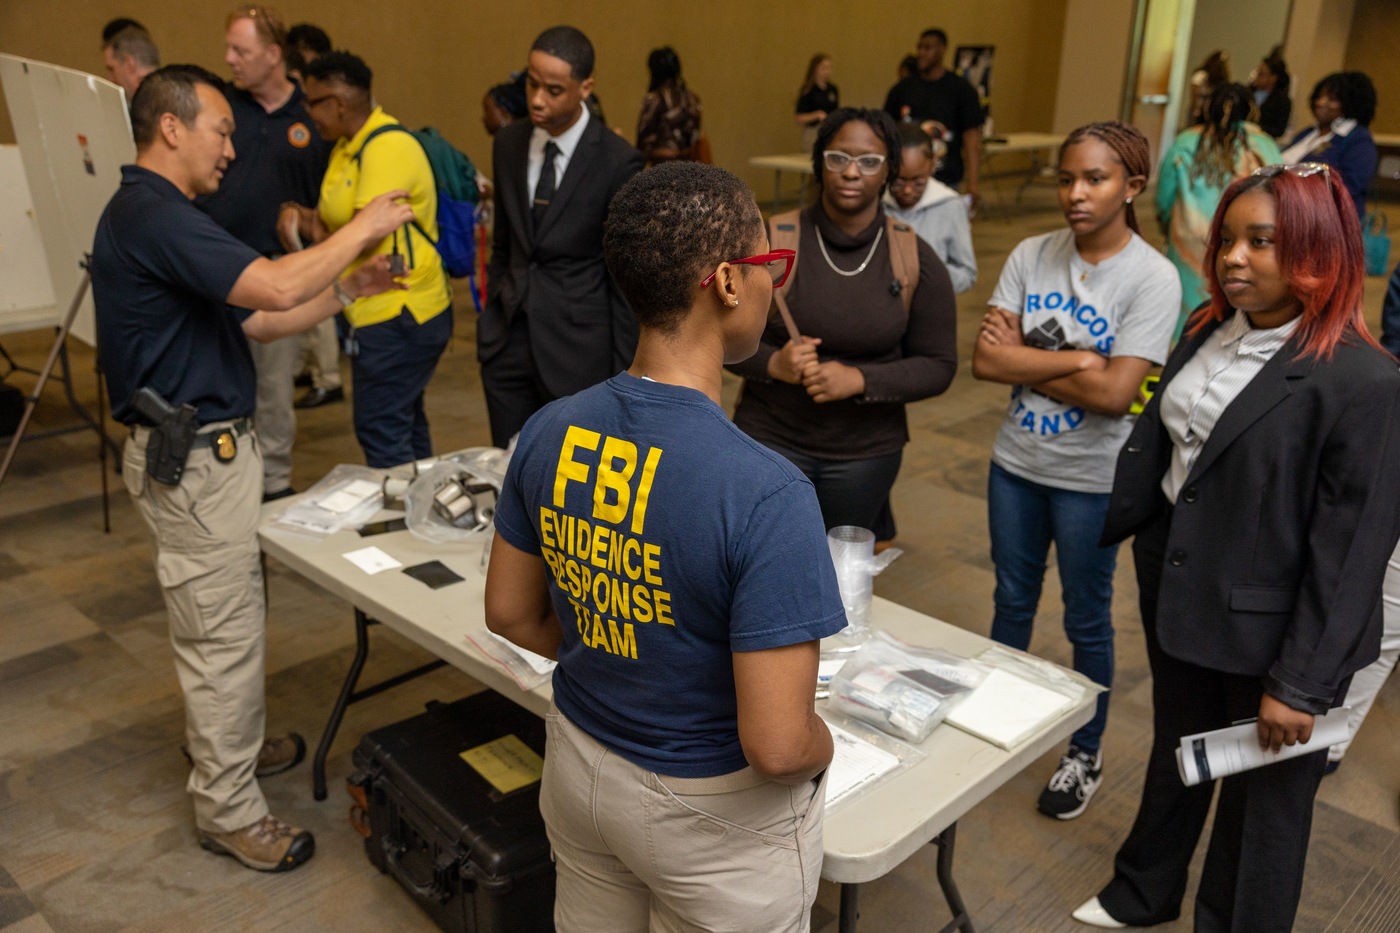 FBI personnel are shown while speaking with college students.